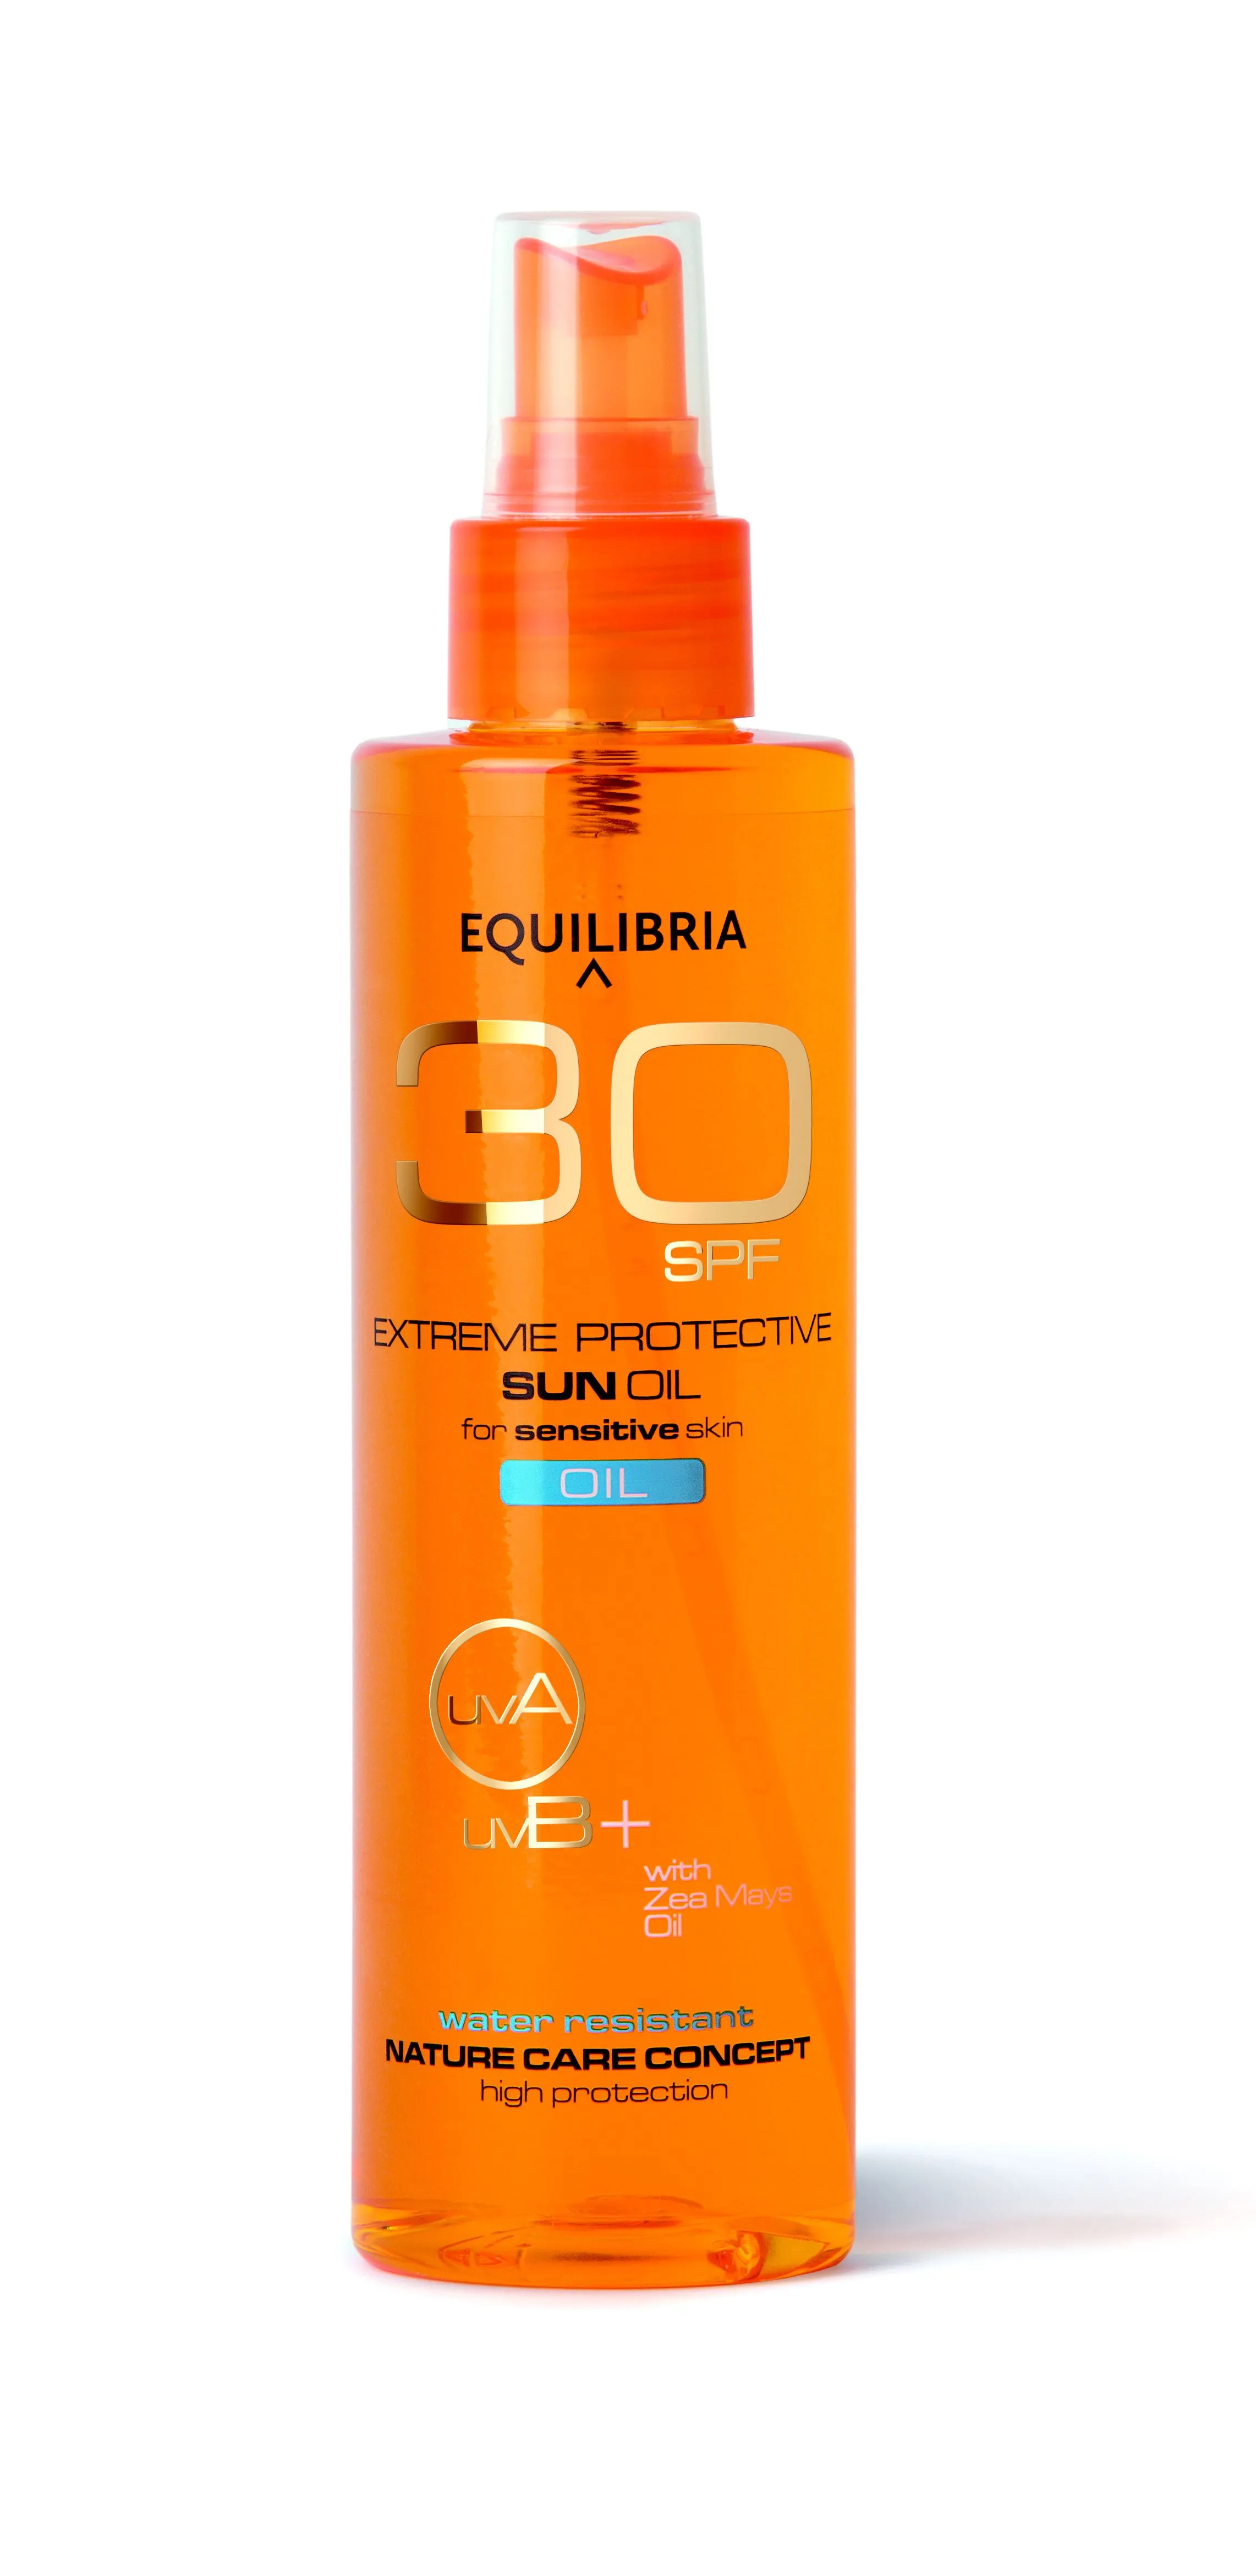 EQUILIBRIA Extreme Protective Sun Oil SPF 30, 200ml